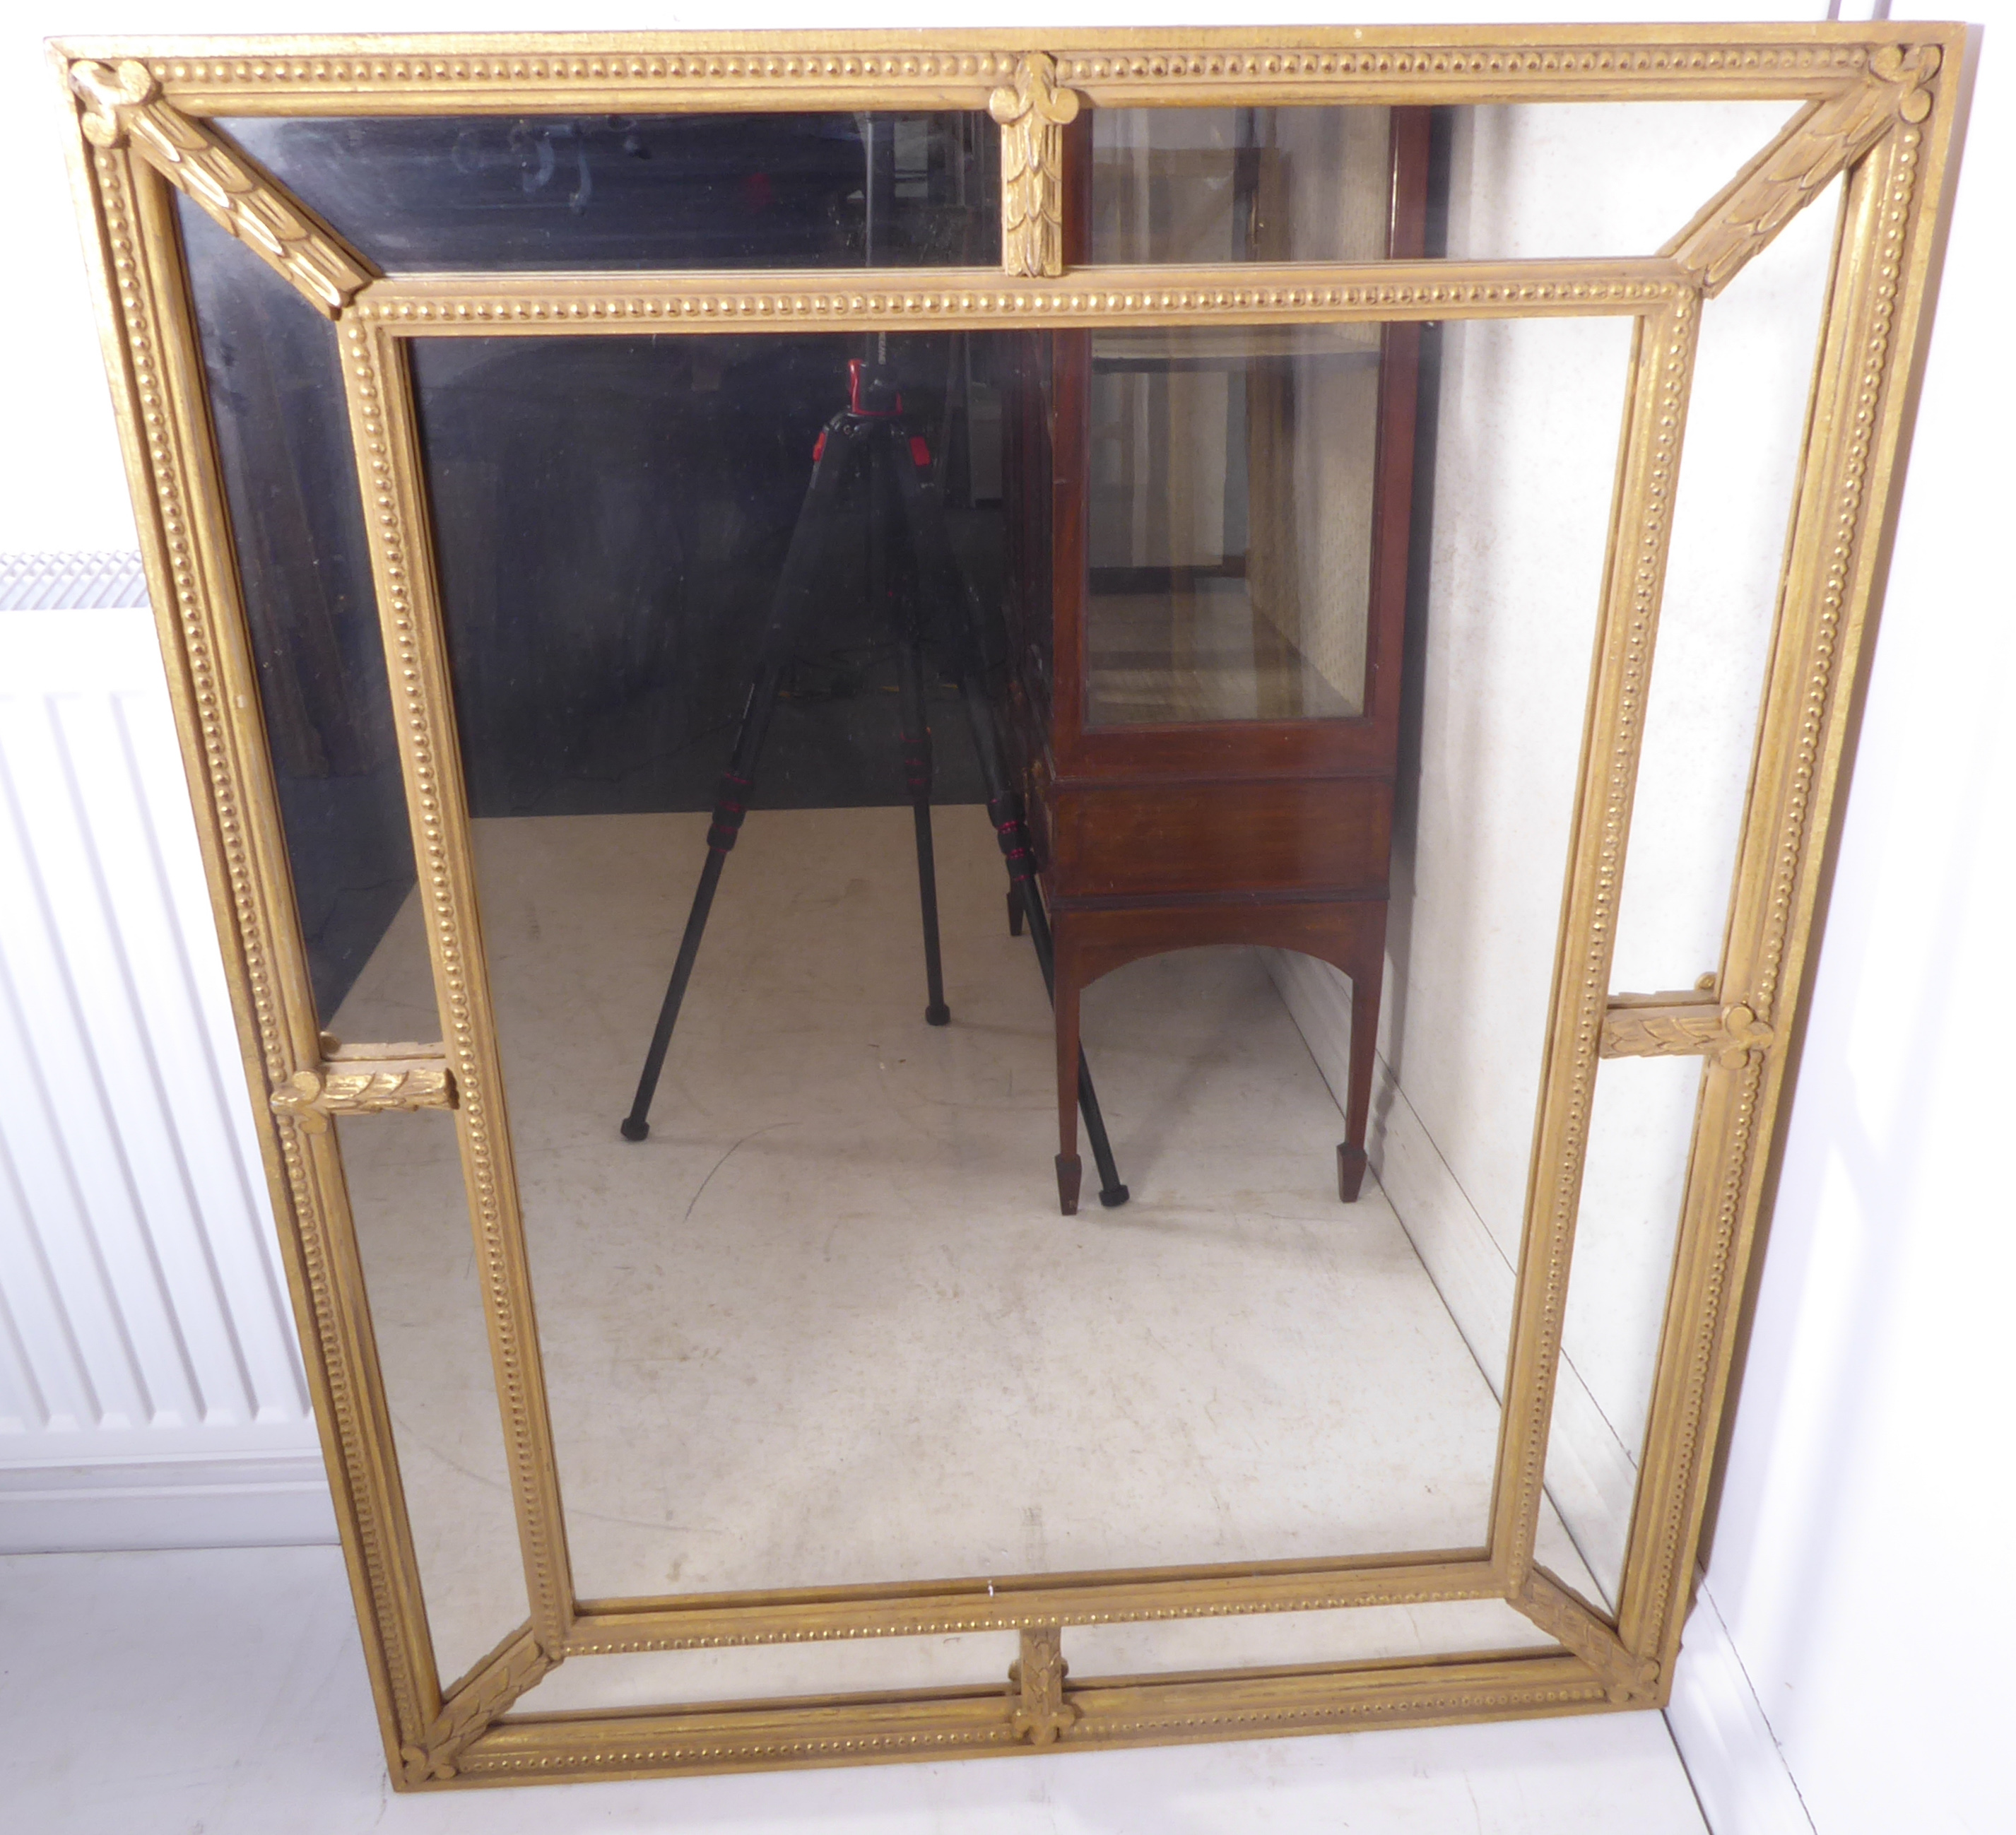 A gilt-framed wall-hanging looking glass in late 18th century style (frame size 106.5cm x 86cm) - Image 4 of 4